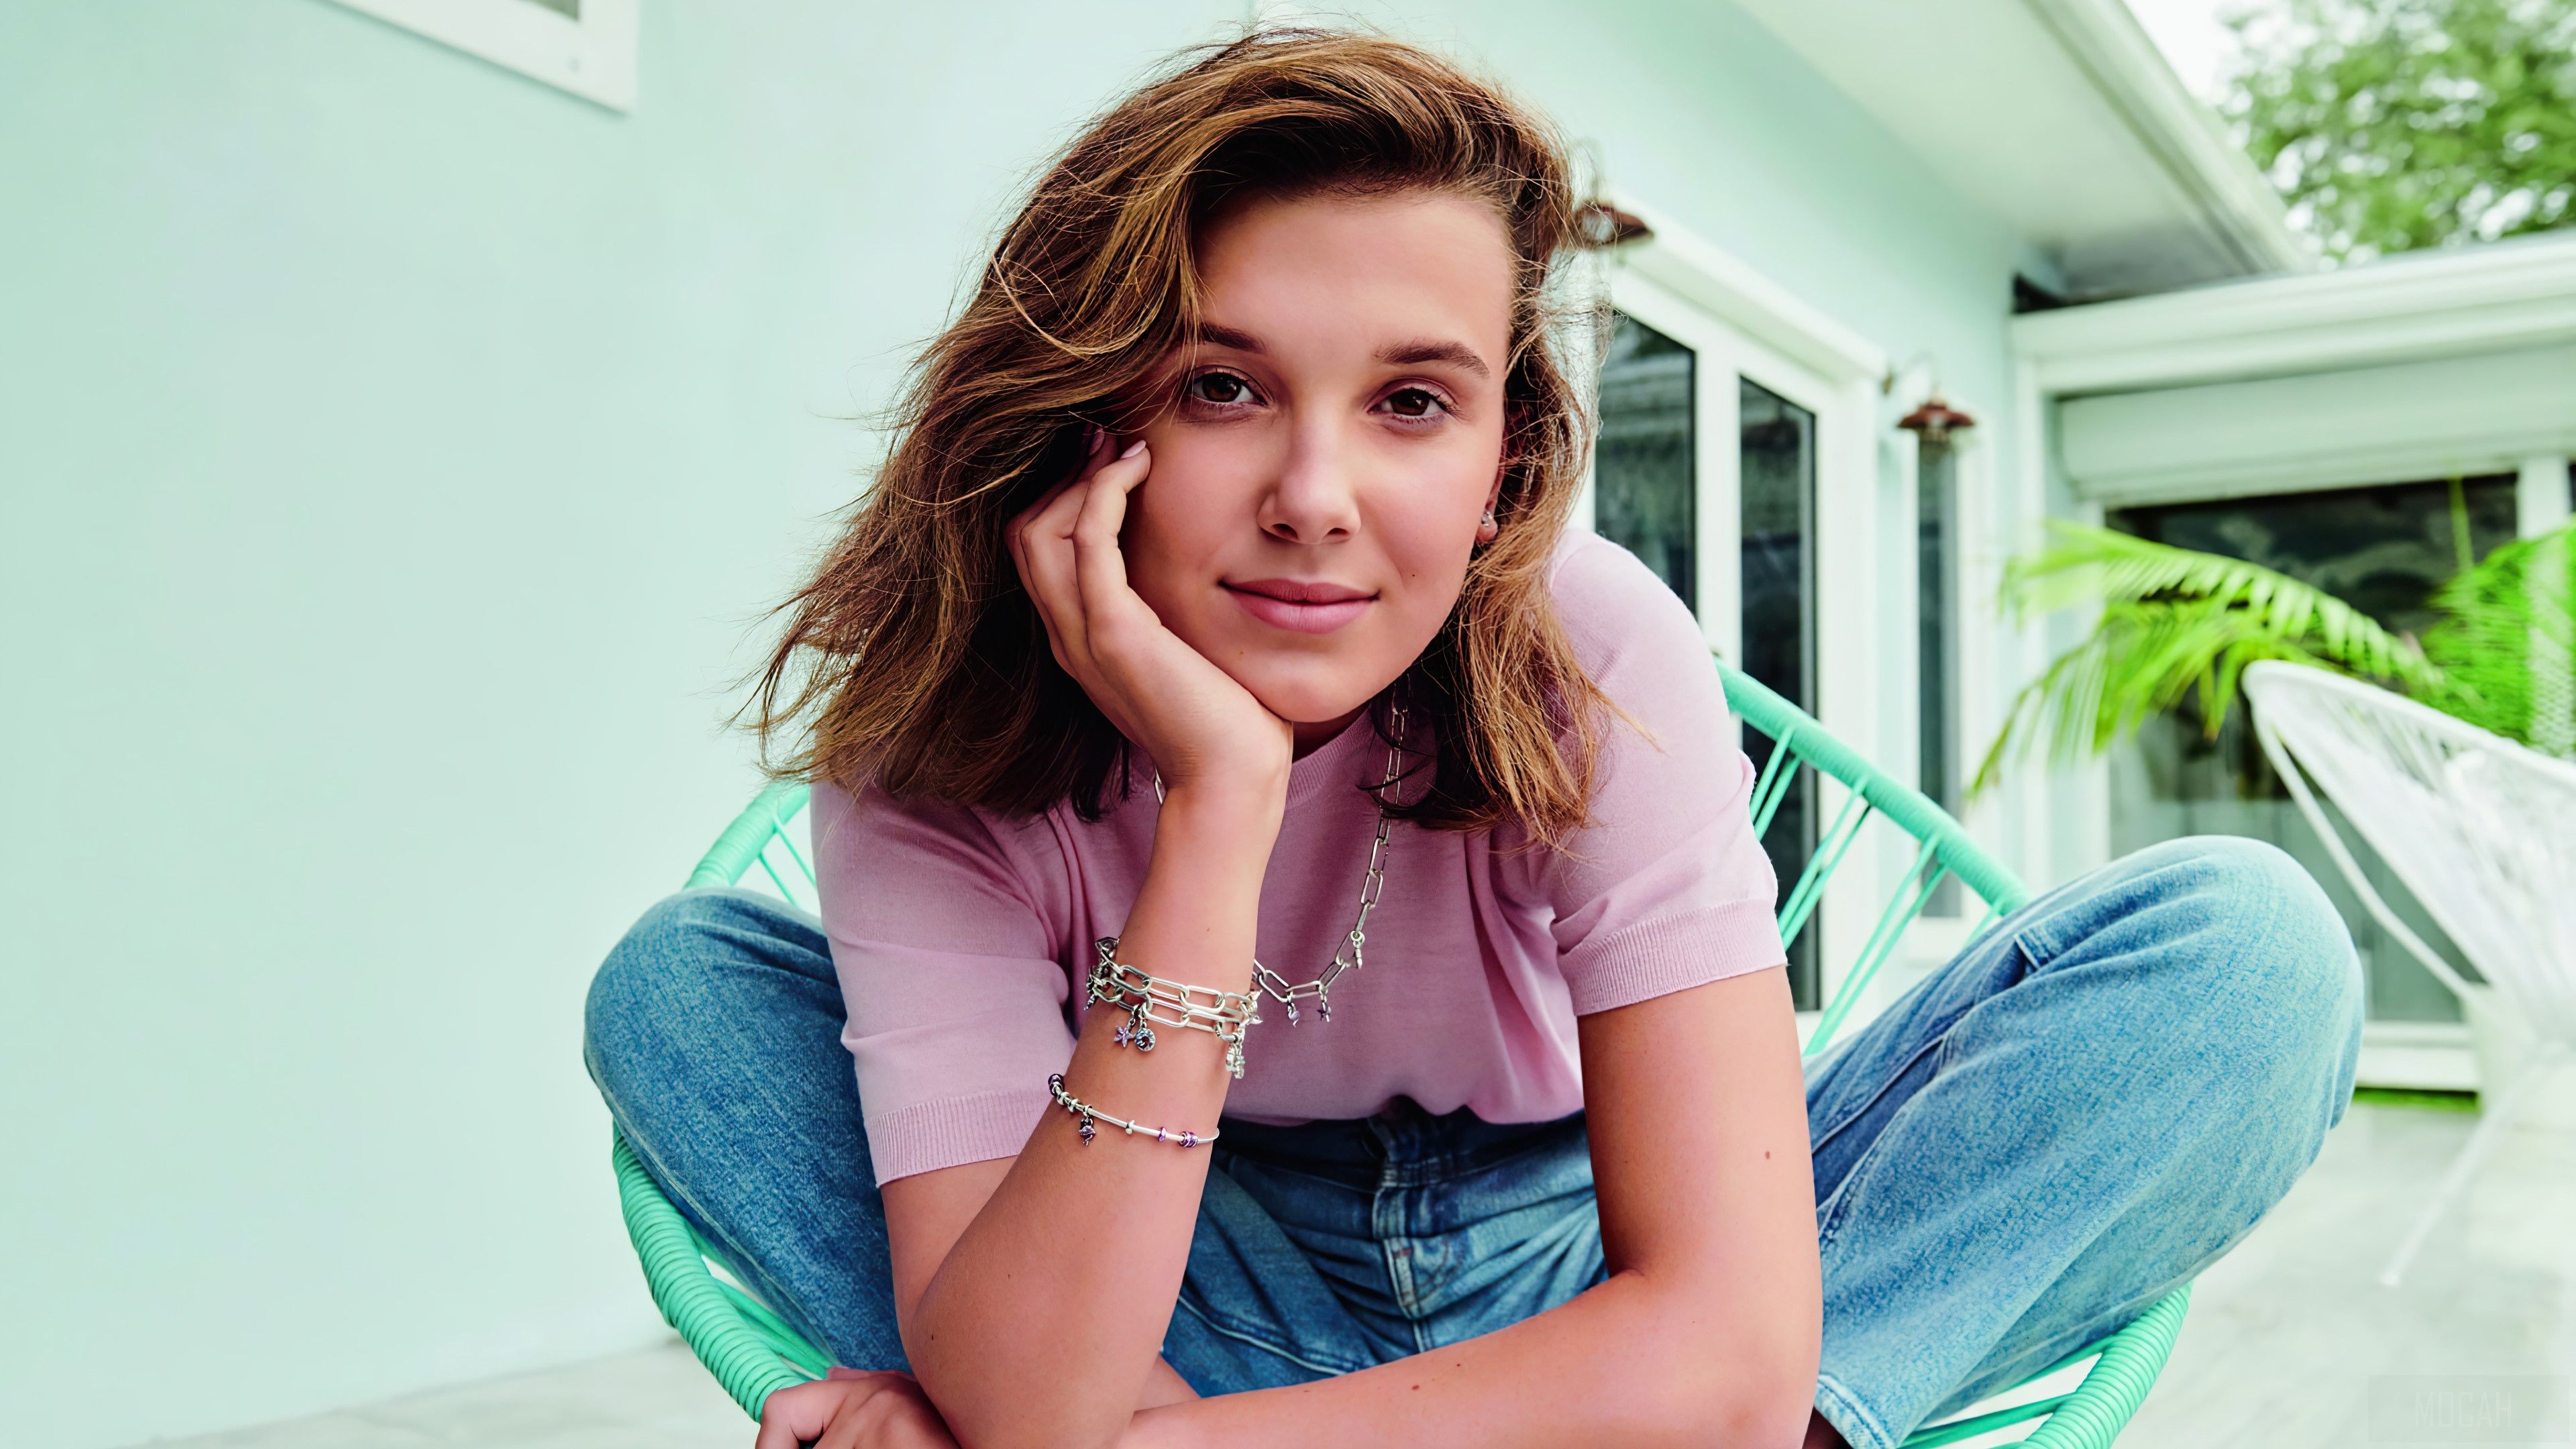 Millie Bobby Brown HD wallpaper, Background